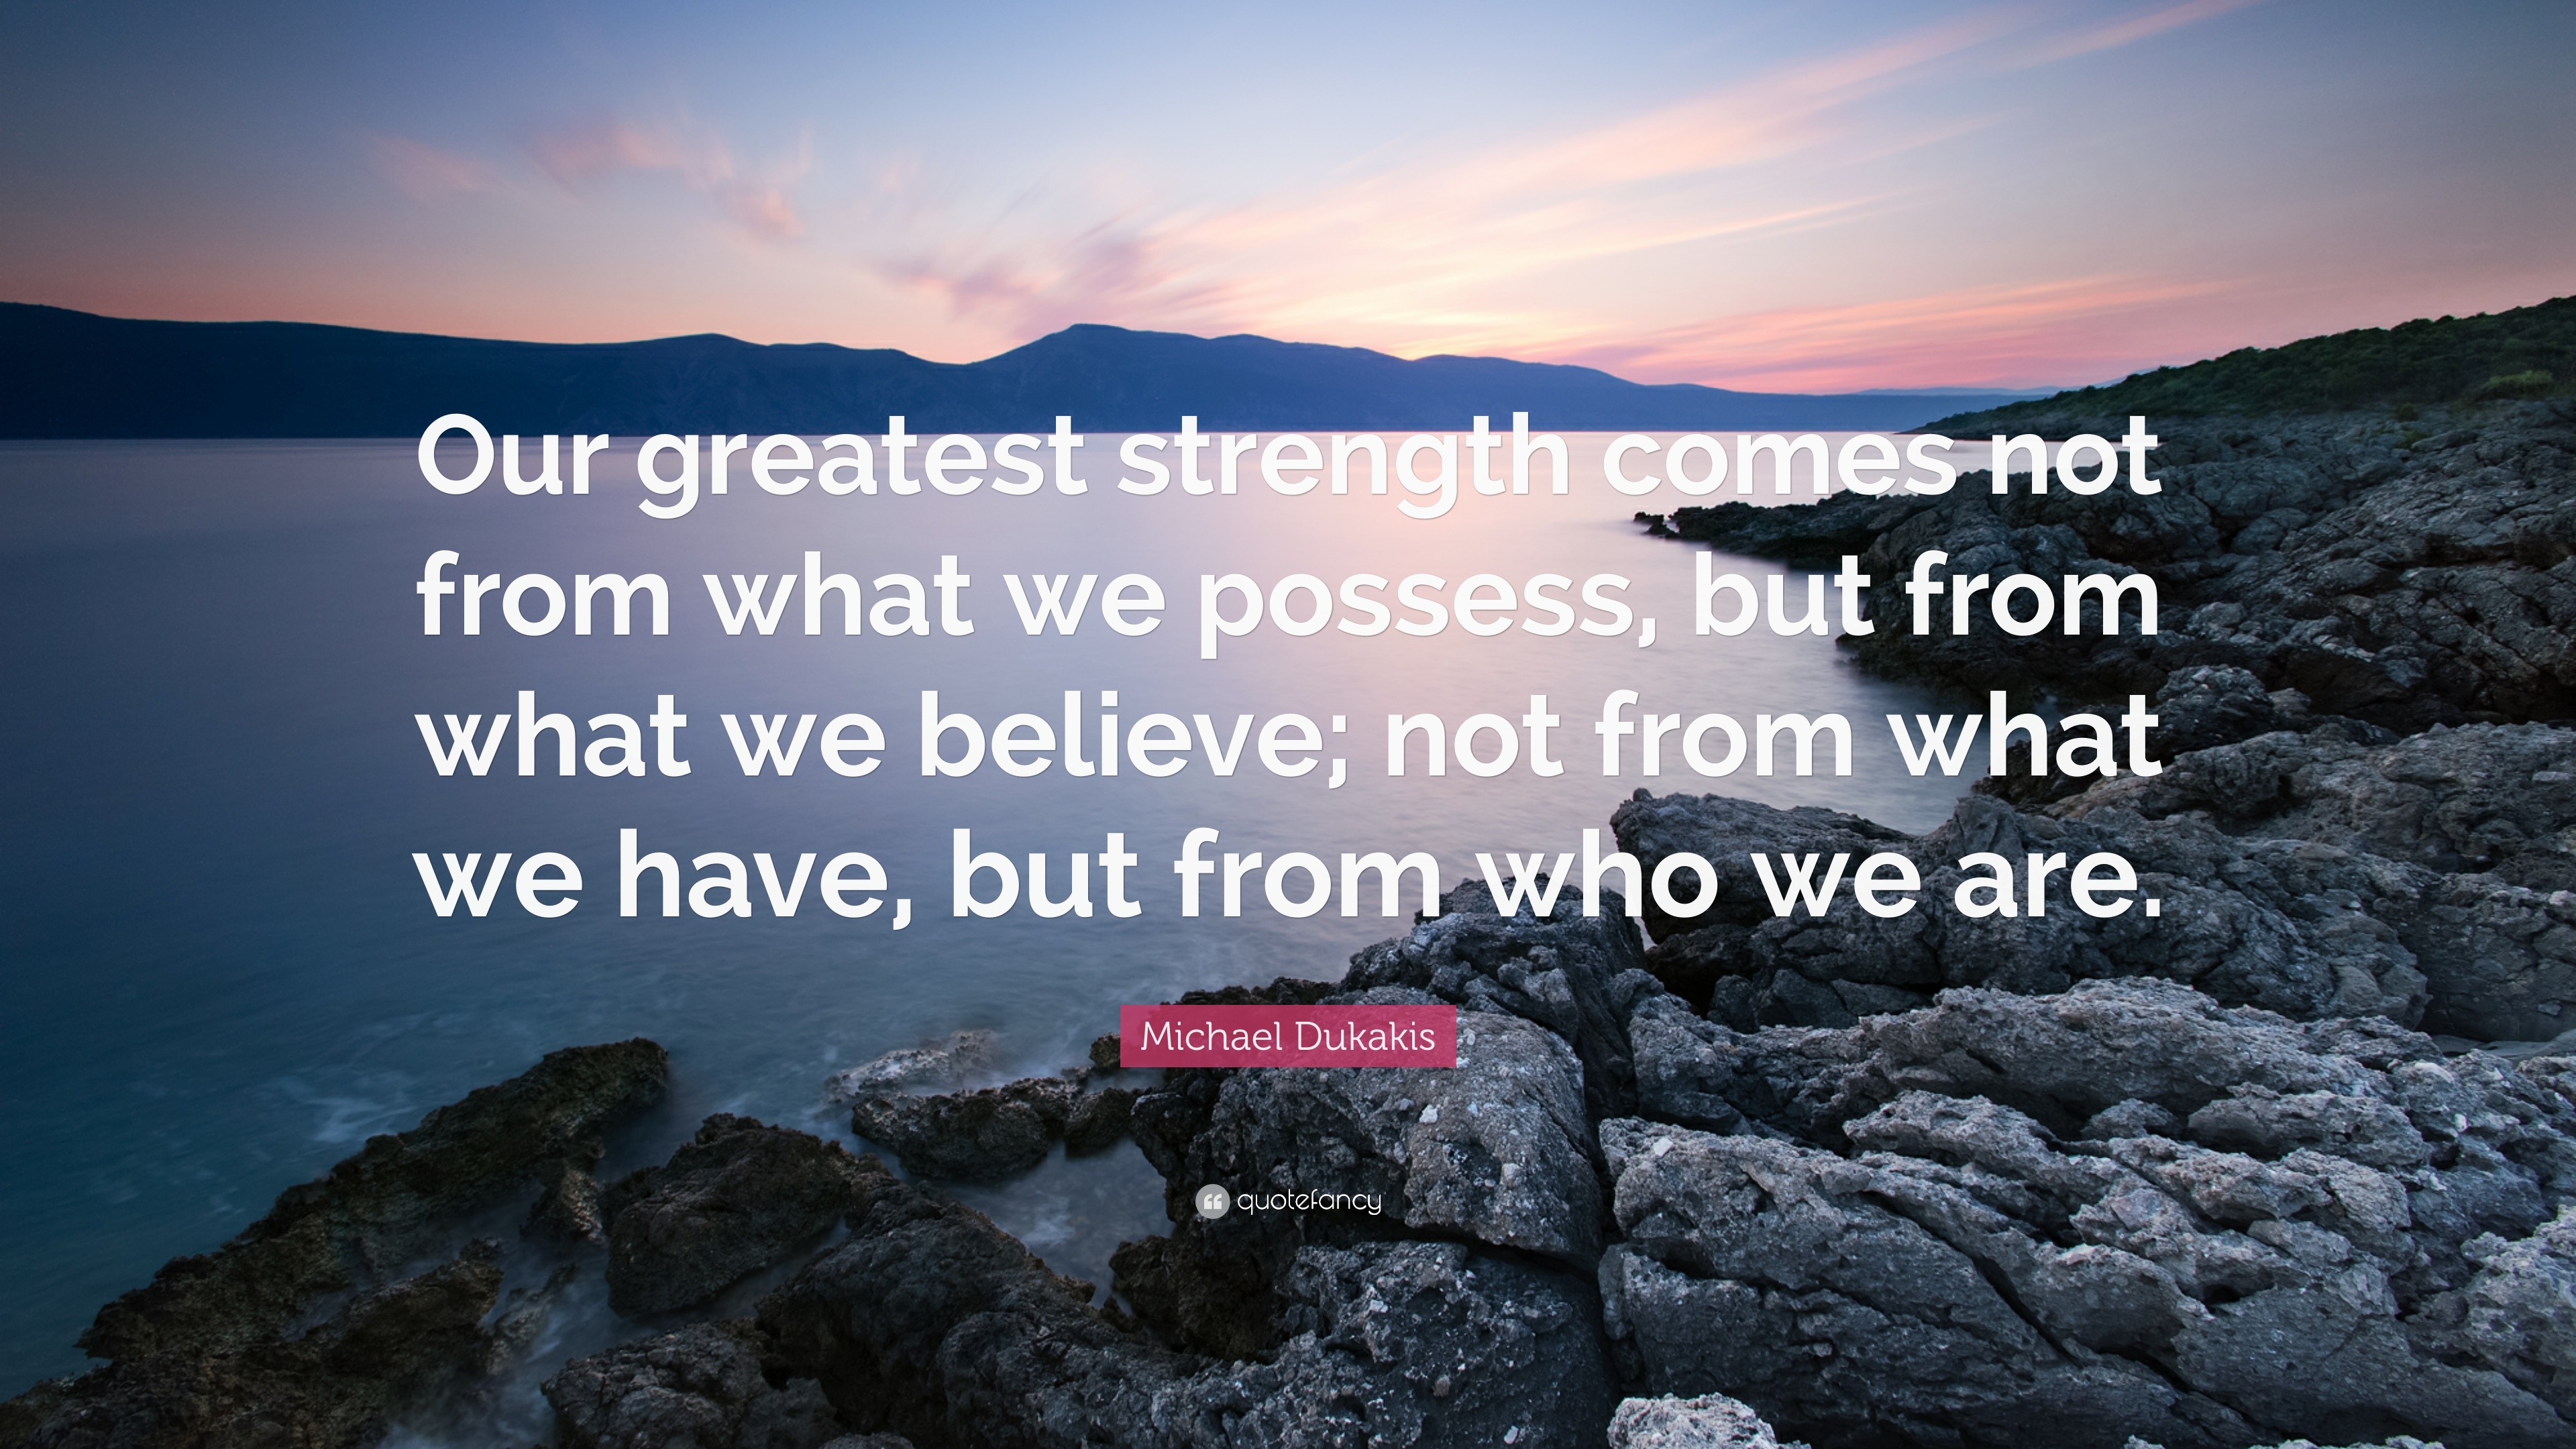 Michael Dukakis Quote: “Our greatest strength comes not from what we ...